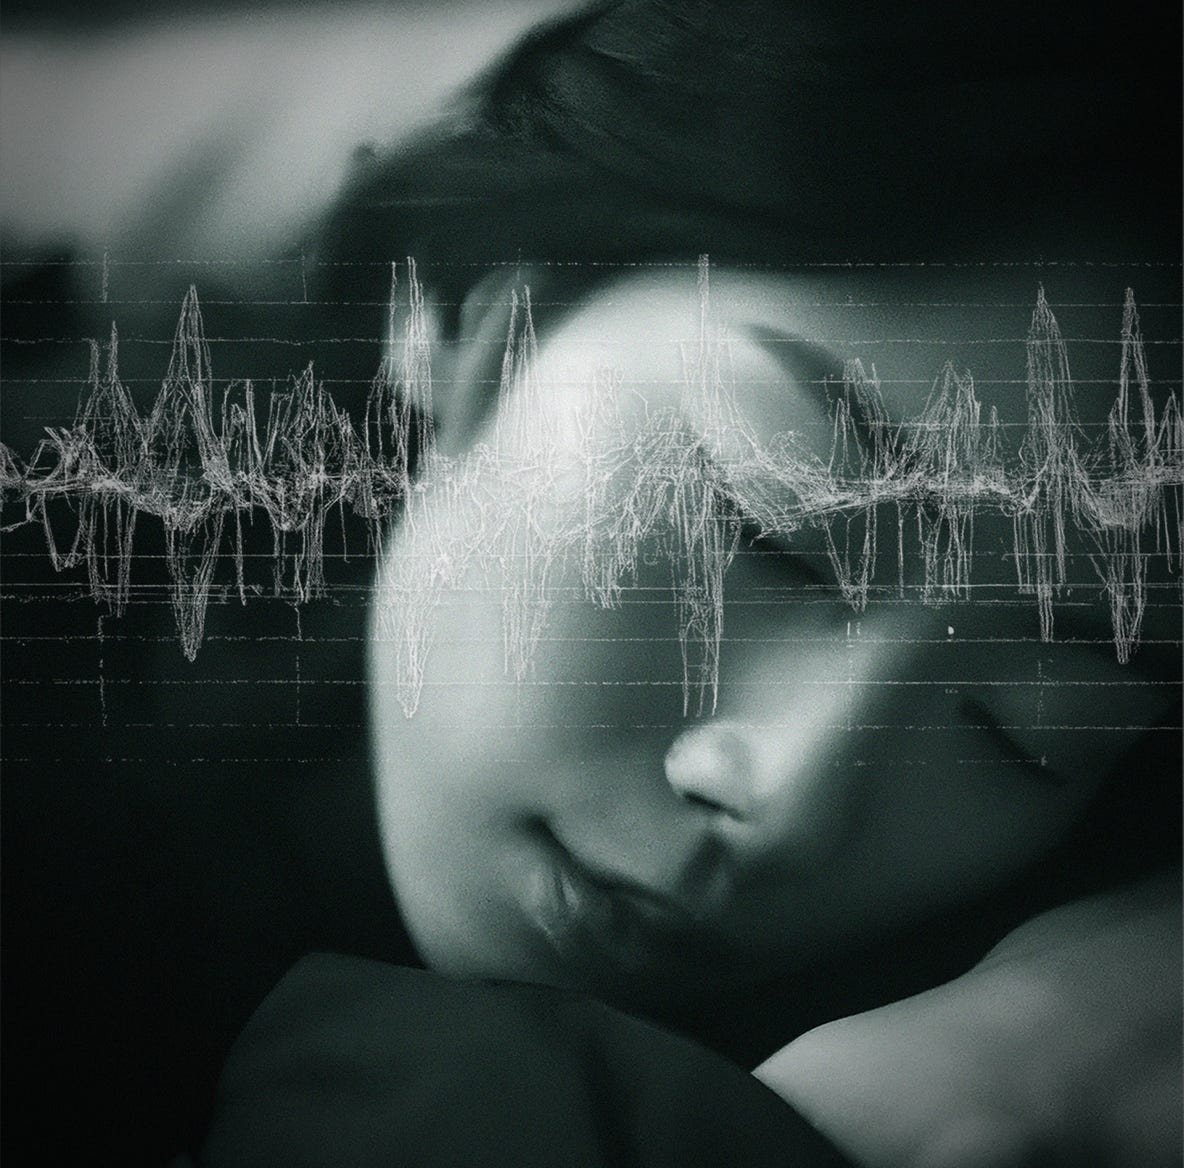 Beautiful Sleeping Asian Woman with brainwave encephalogram graphic image, b/w photography  f/low: Ambient Music inspired by the latest findings in neuroscience, auditory physiology and psychoacoustics. Binaural Beats, ASMR and Brown Noise form the basis of a musical melange dedicated to deep relaxation and sleep enhancement.